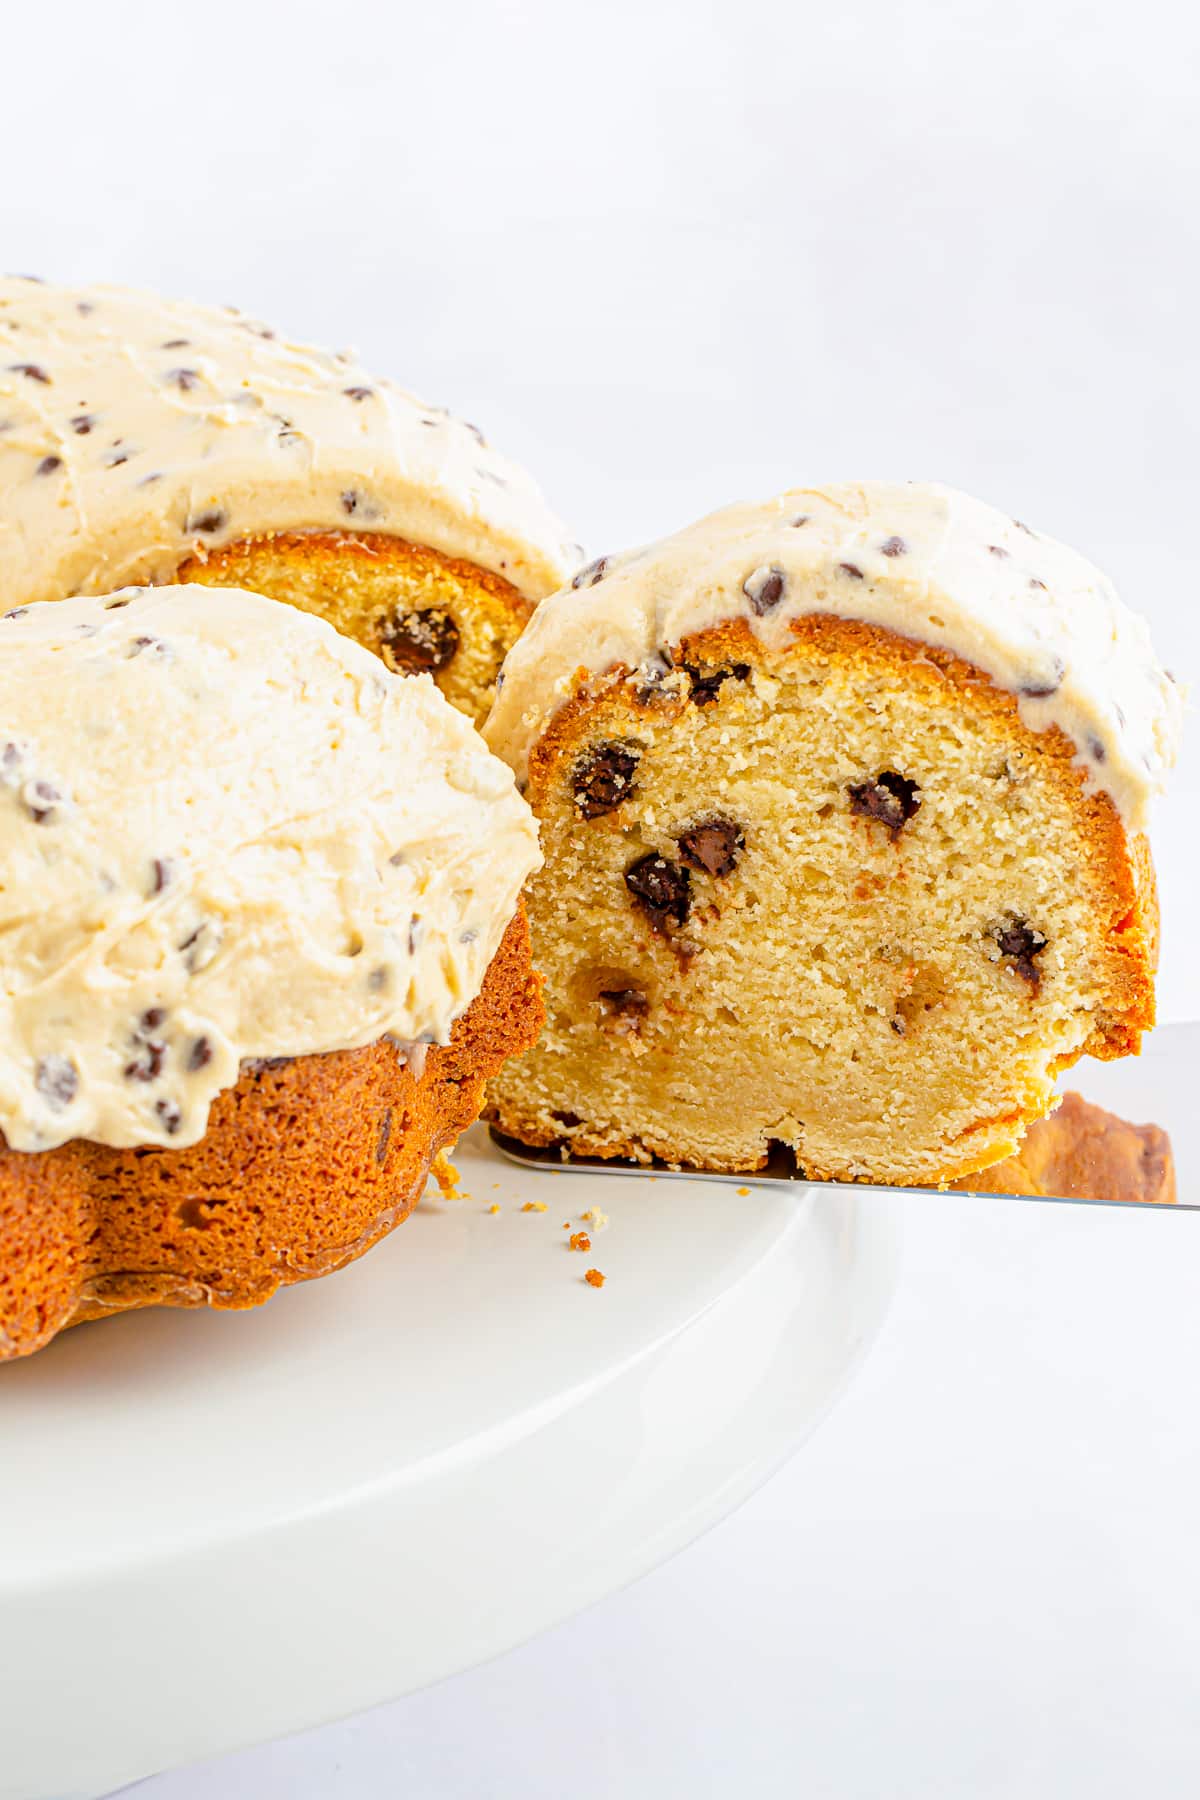 Upclose image of a slice of chocolate chip bundt cake coming out of the cake on a cake server, white cake stand